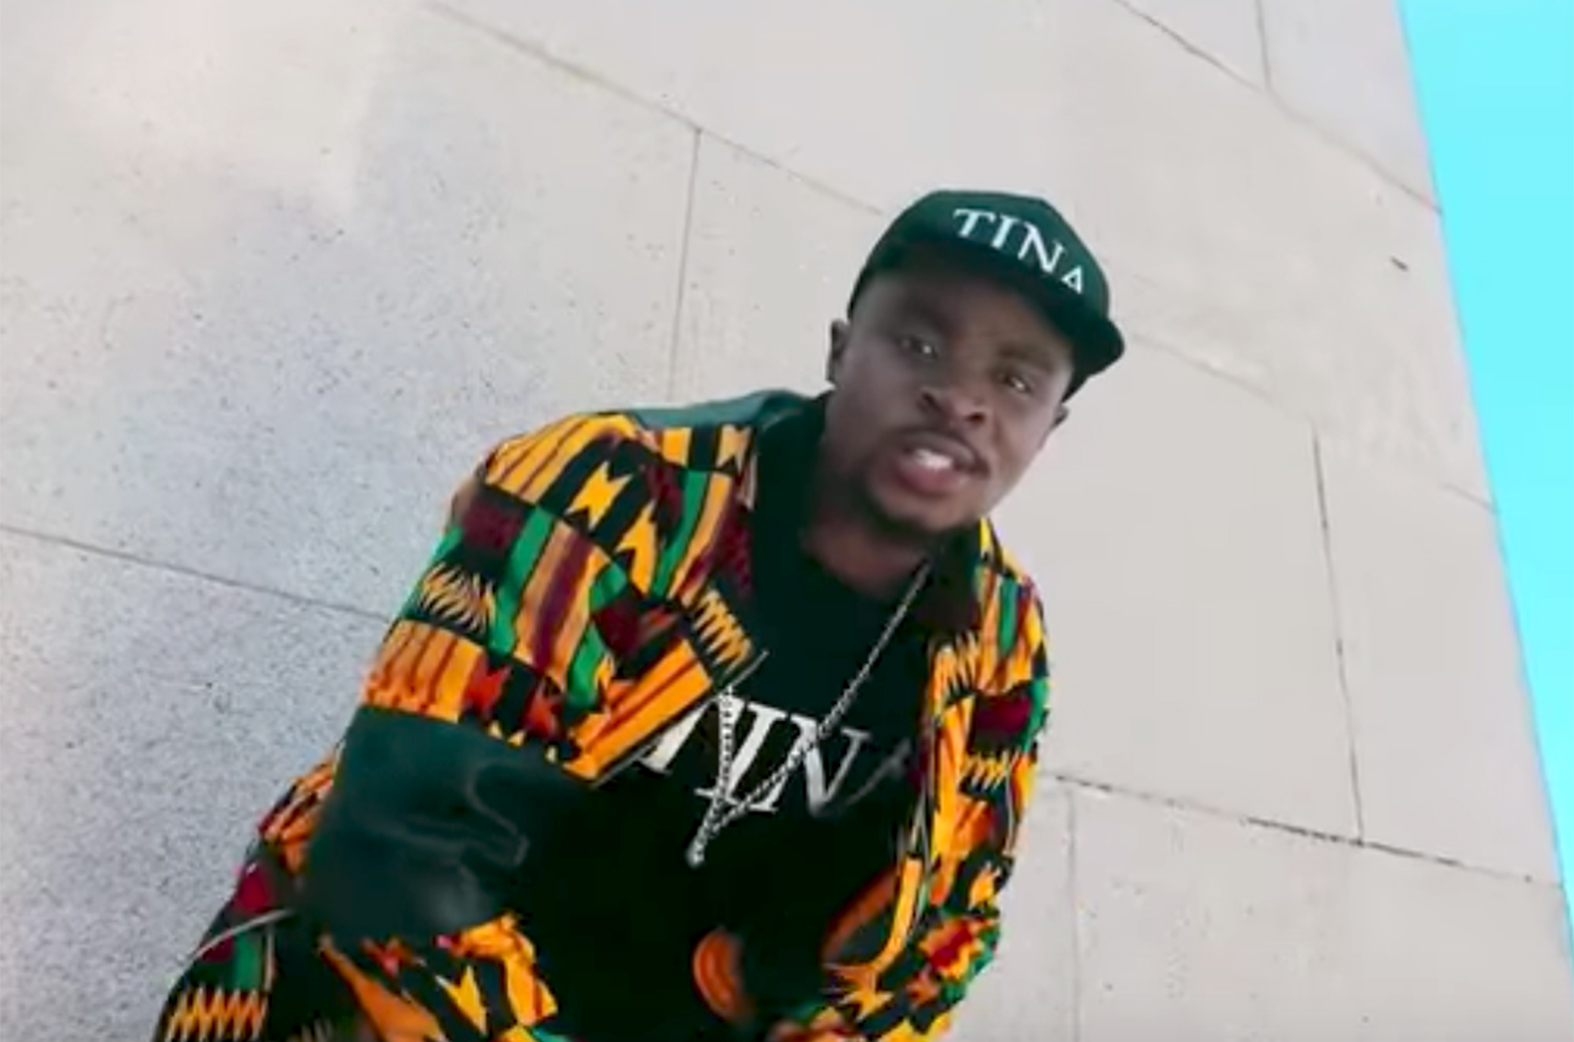 Windows Seat by Fuse ODG